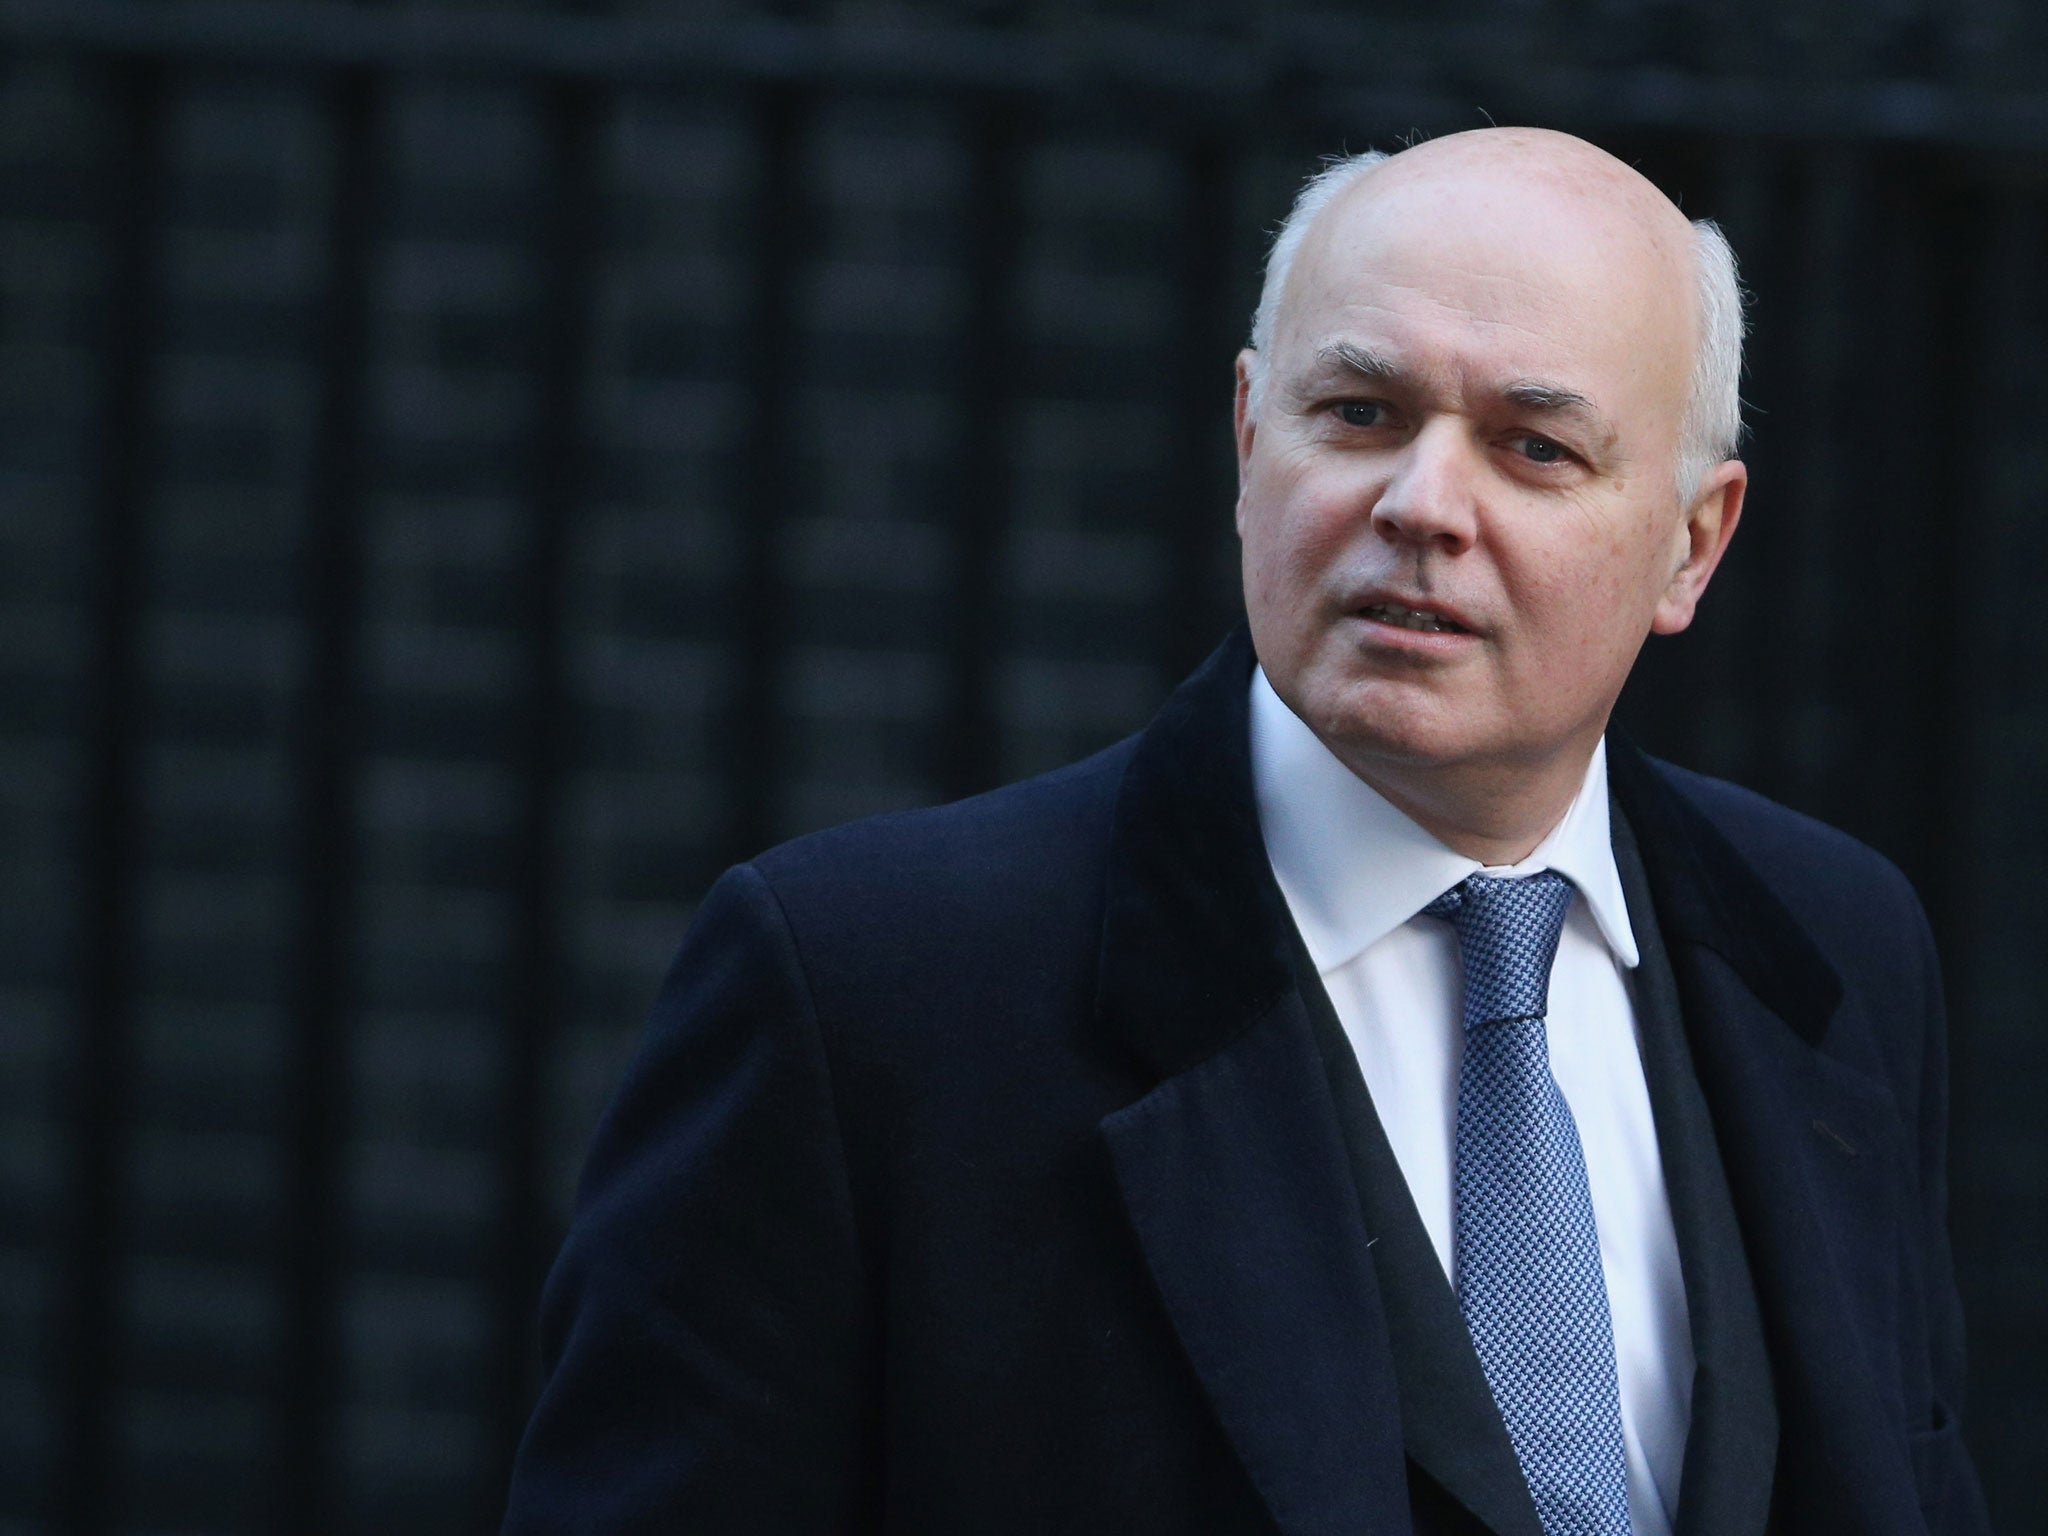 Sir Jeremy Heywood believes part of the responsibility for the failures in the Government's universal credit programme lay with Iain Duncan Smith